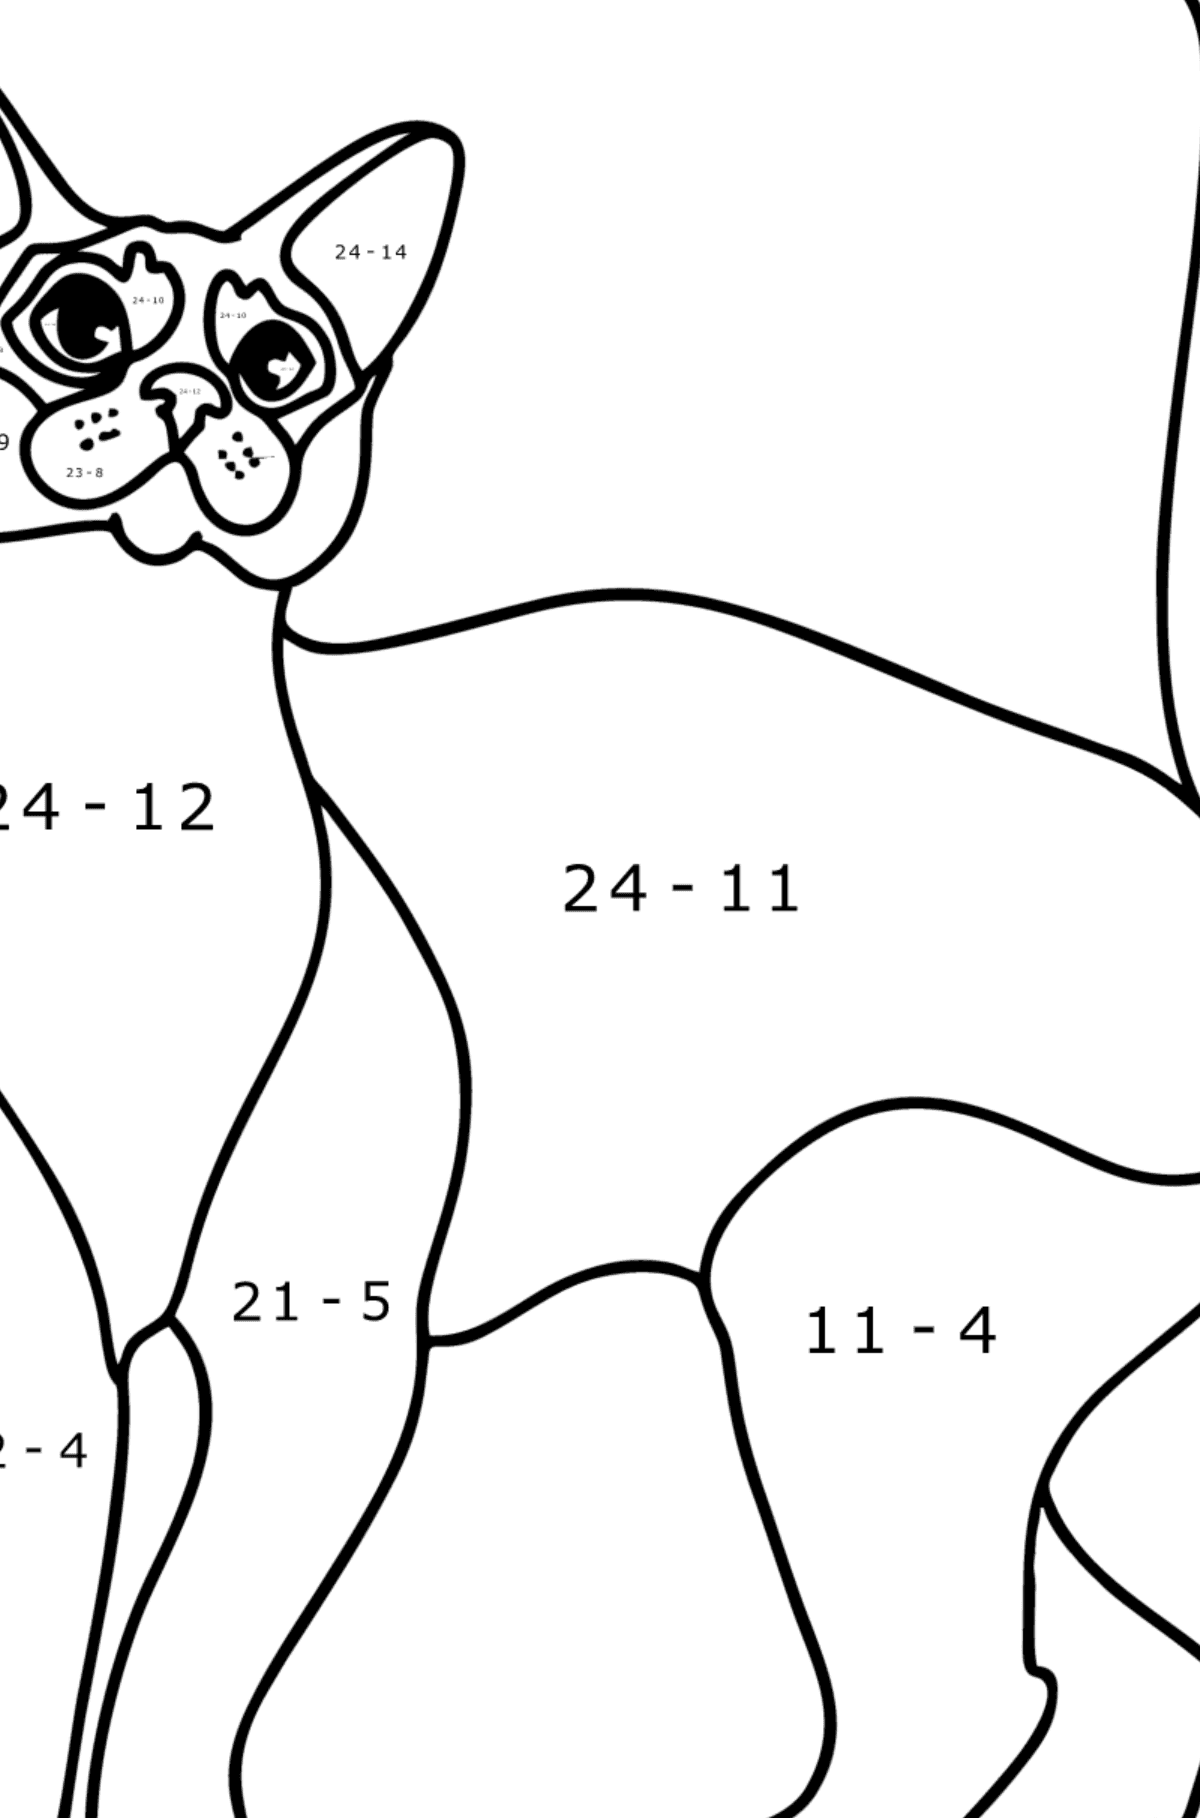 Abyssinian Cat coloring page - Math Coloring - Subtraction for Kids